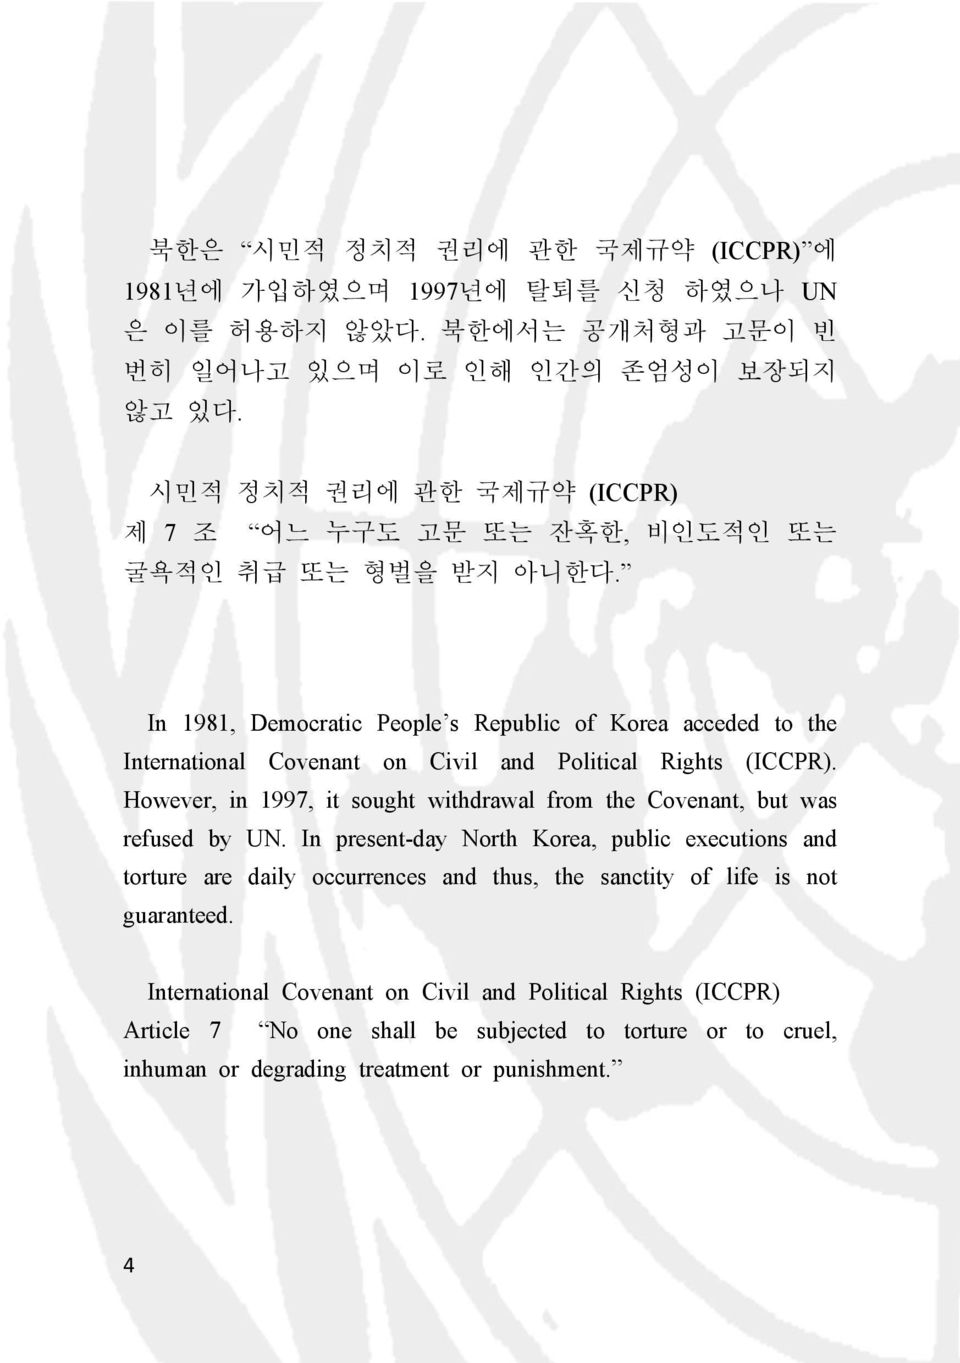 In 1981, Democratic People s Republic of Korea acceded to the International Covenant on Civil and Political Rights (ICCPR).